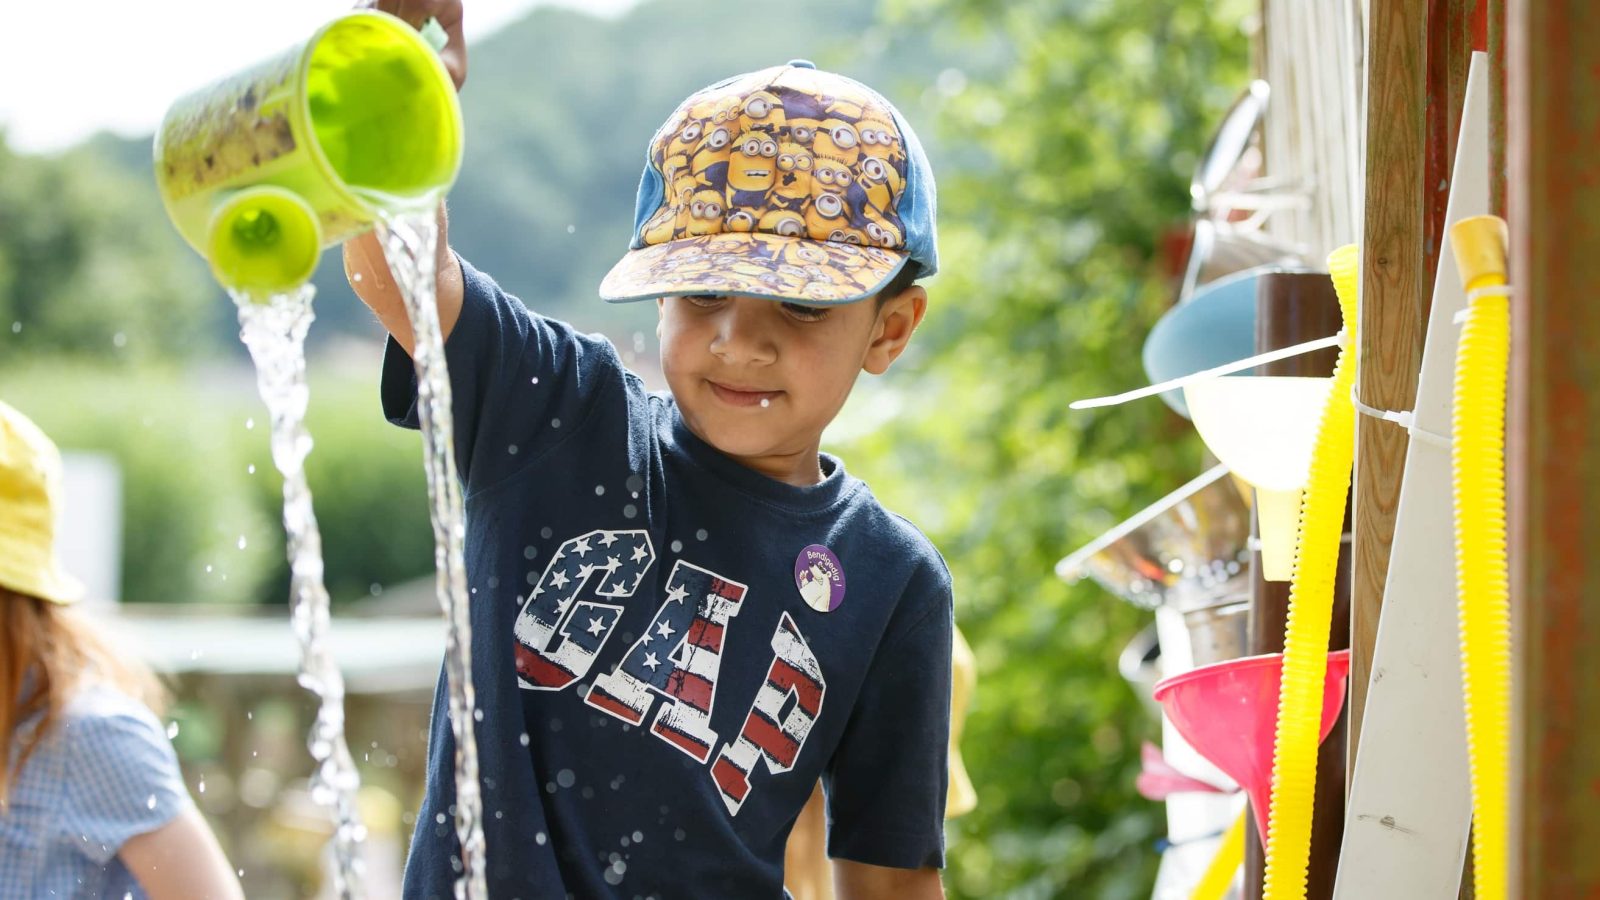 A young boy wearing a minions cap pours water from a green watering can, smiling as he plays outdoors on a sunny day.